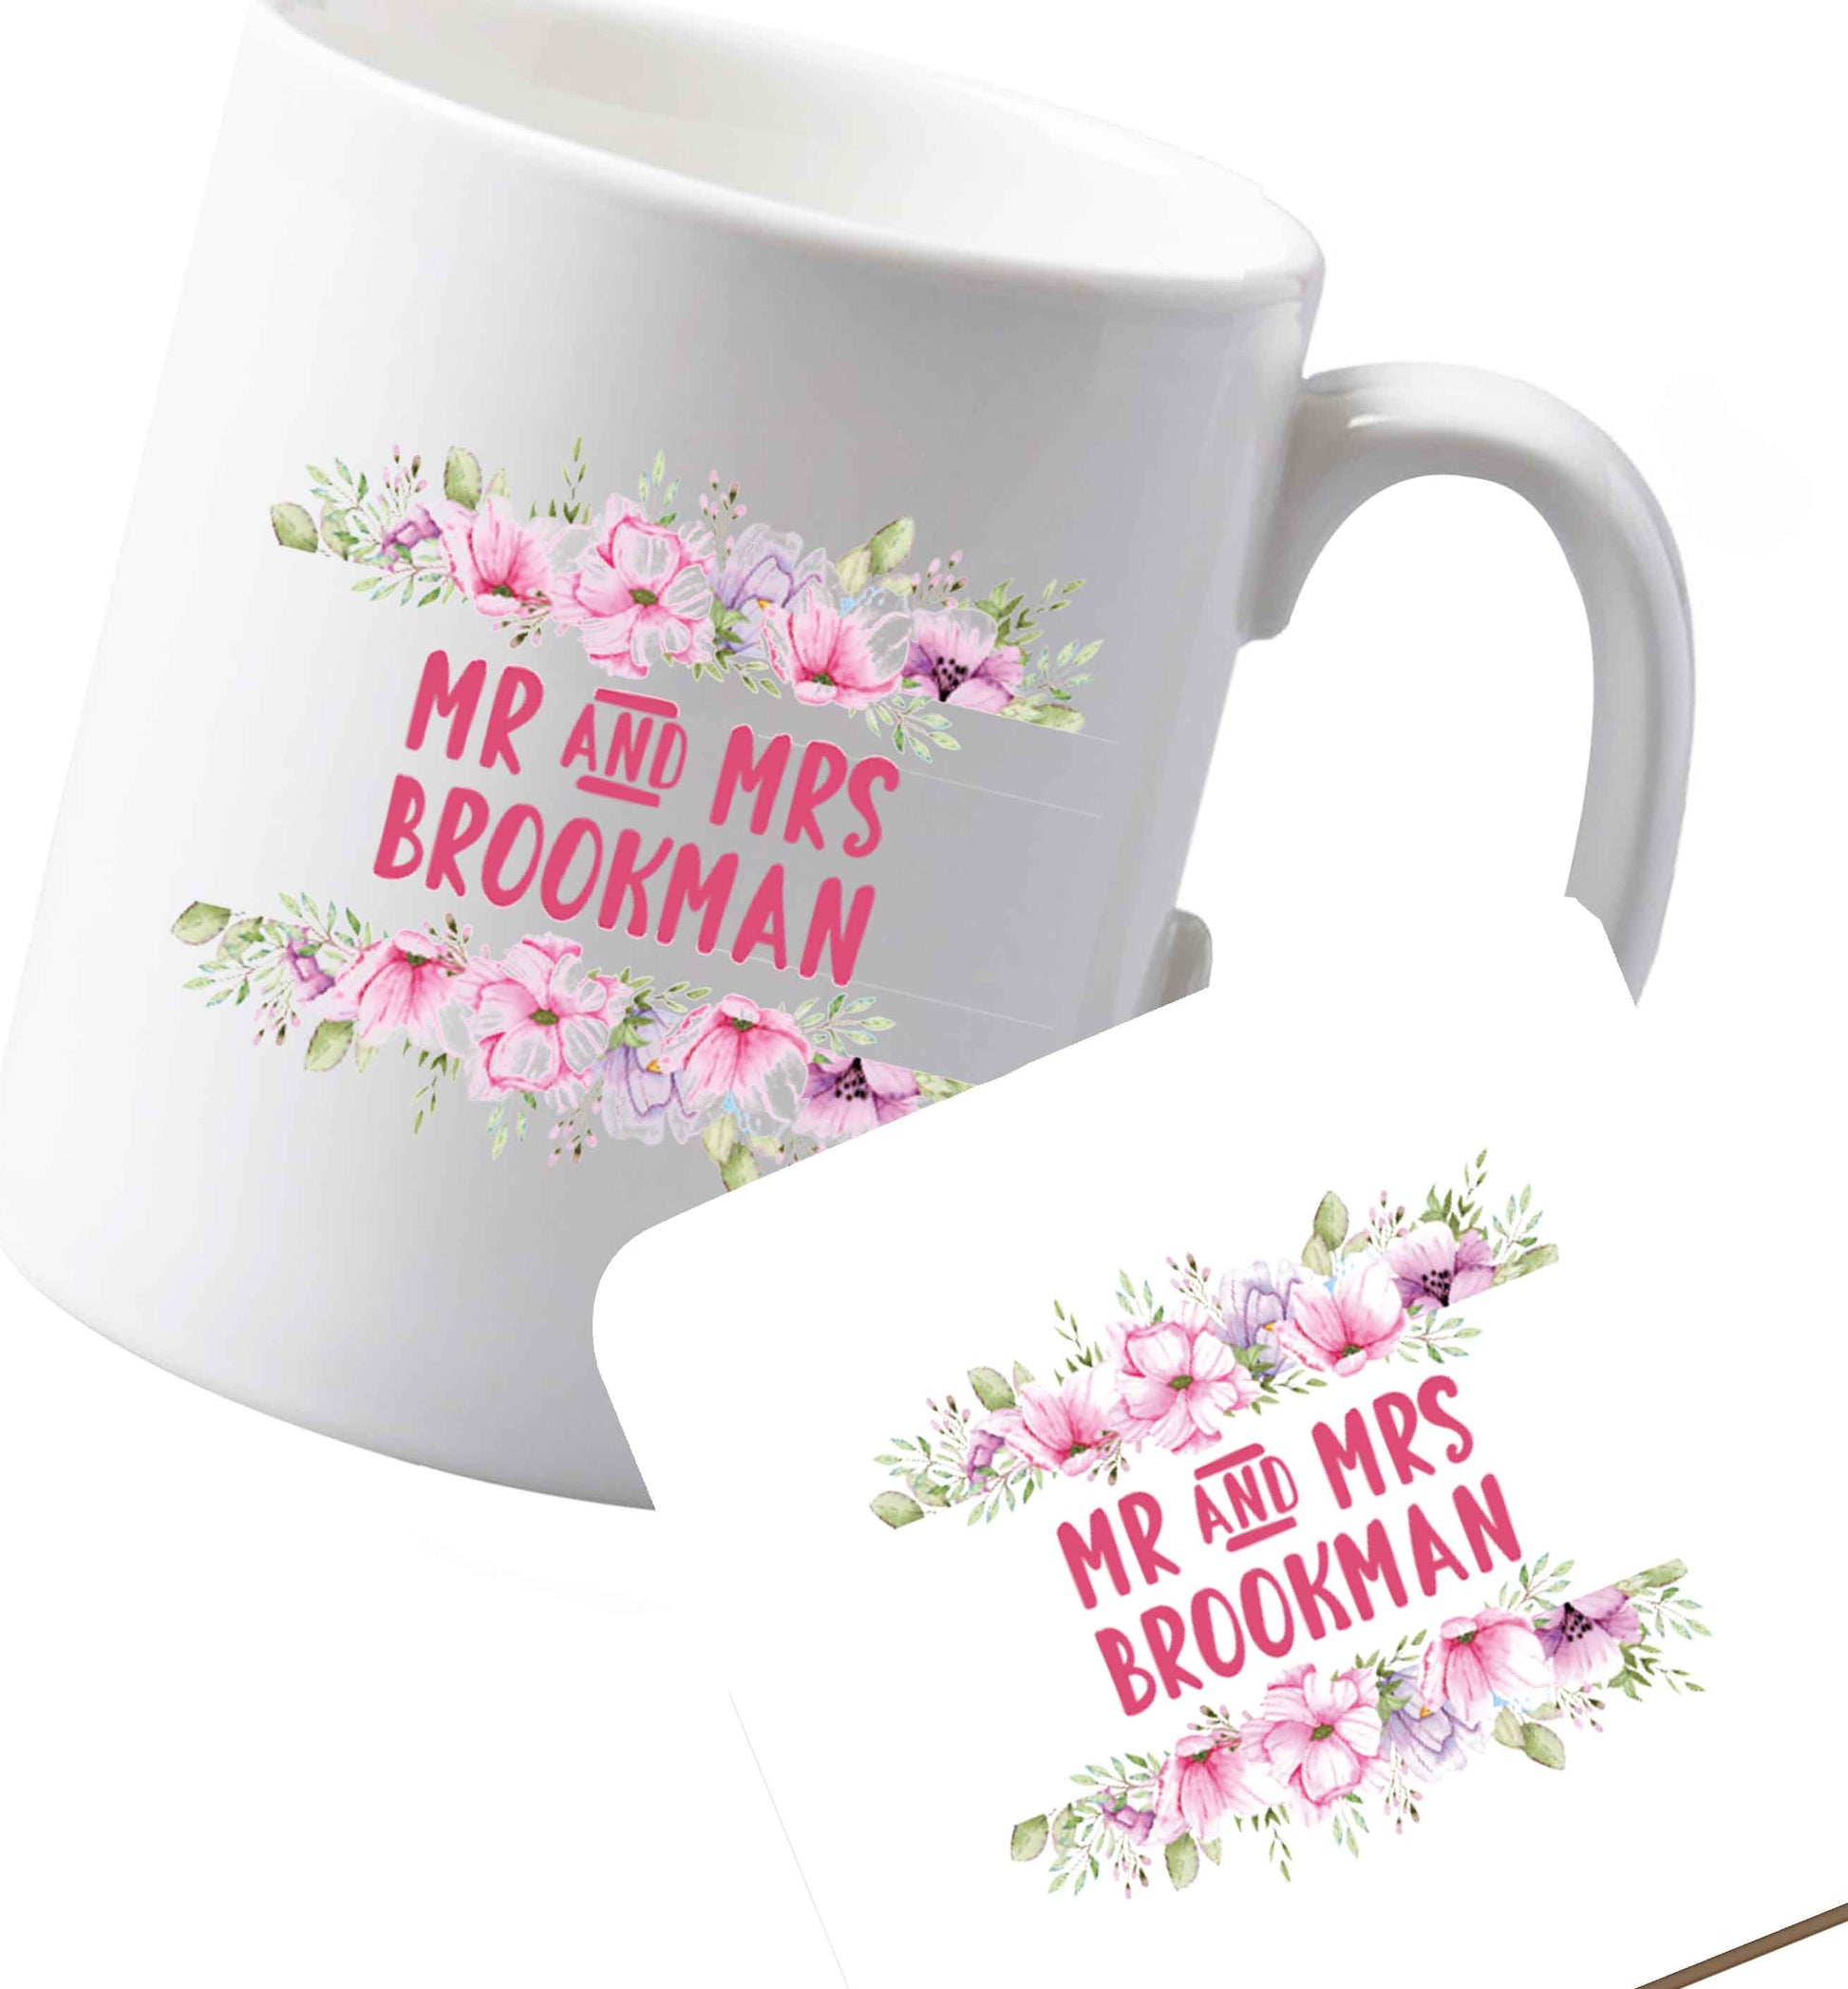 10 oz Ceramic mug and coaster Personalised Mr and Mrs wedding and date! Ideal wedding favours!   both sides